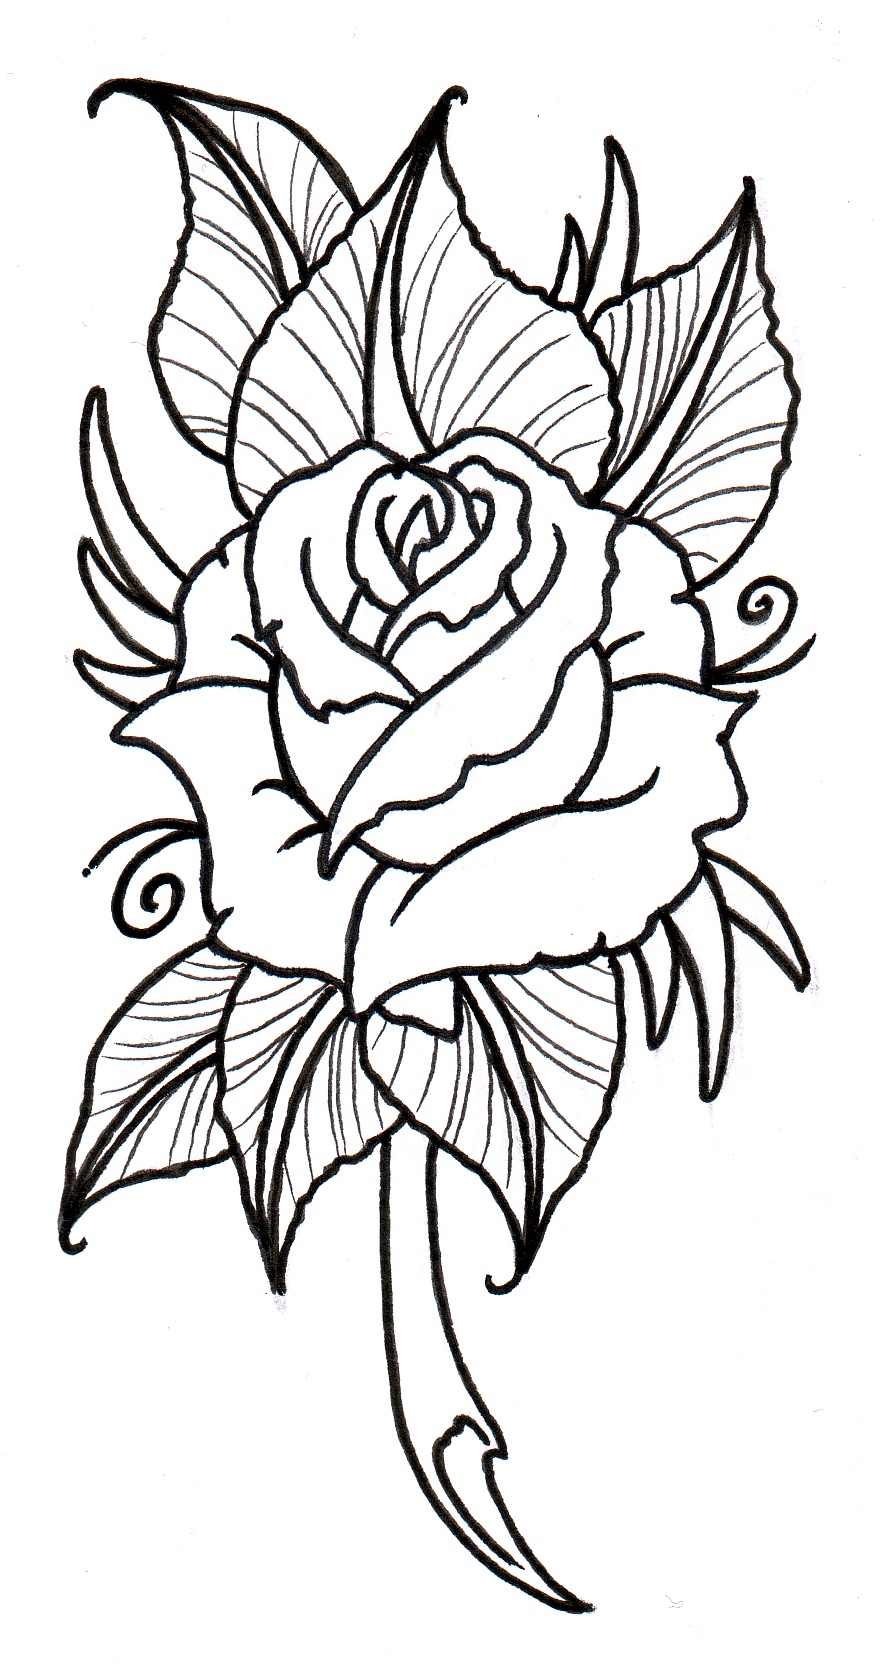 Rose Tattoo Sketches - ClipArt Best